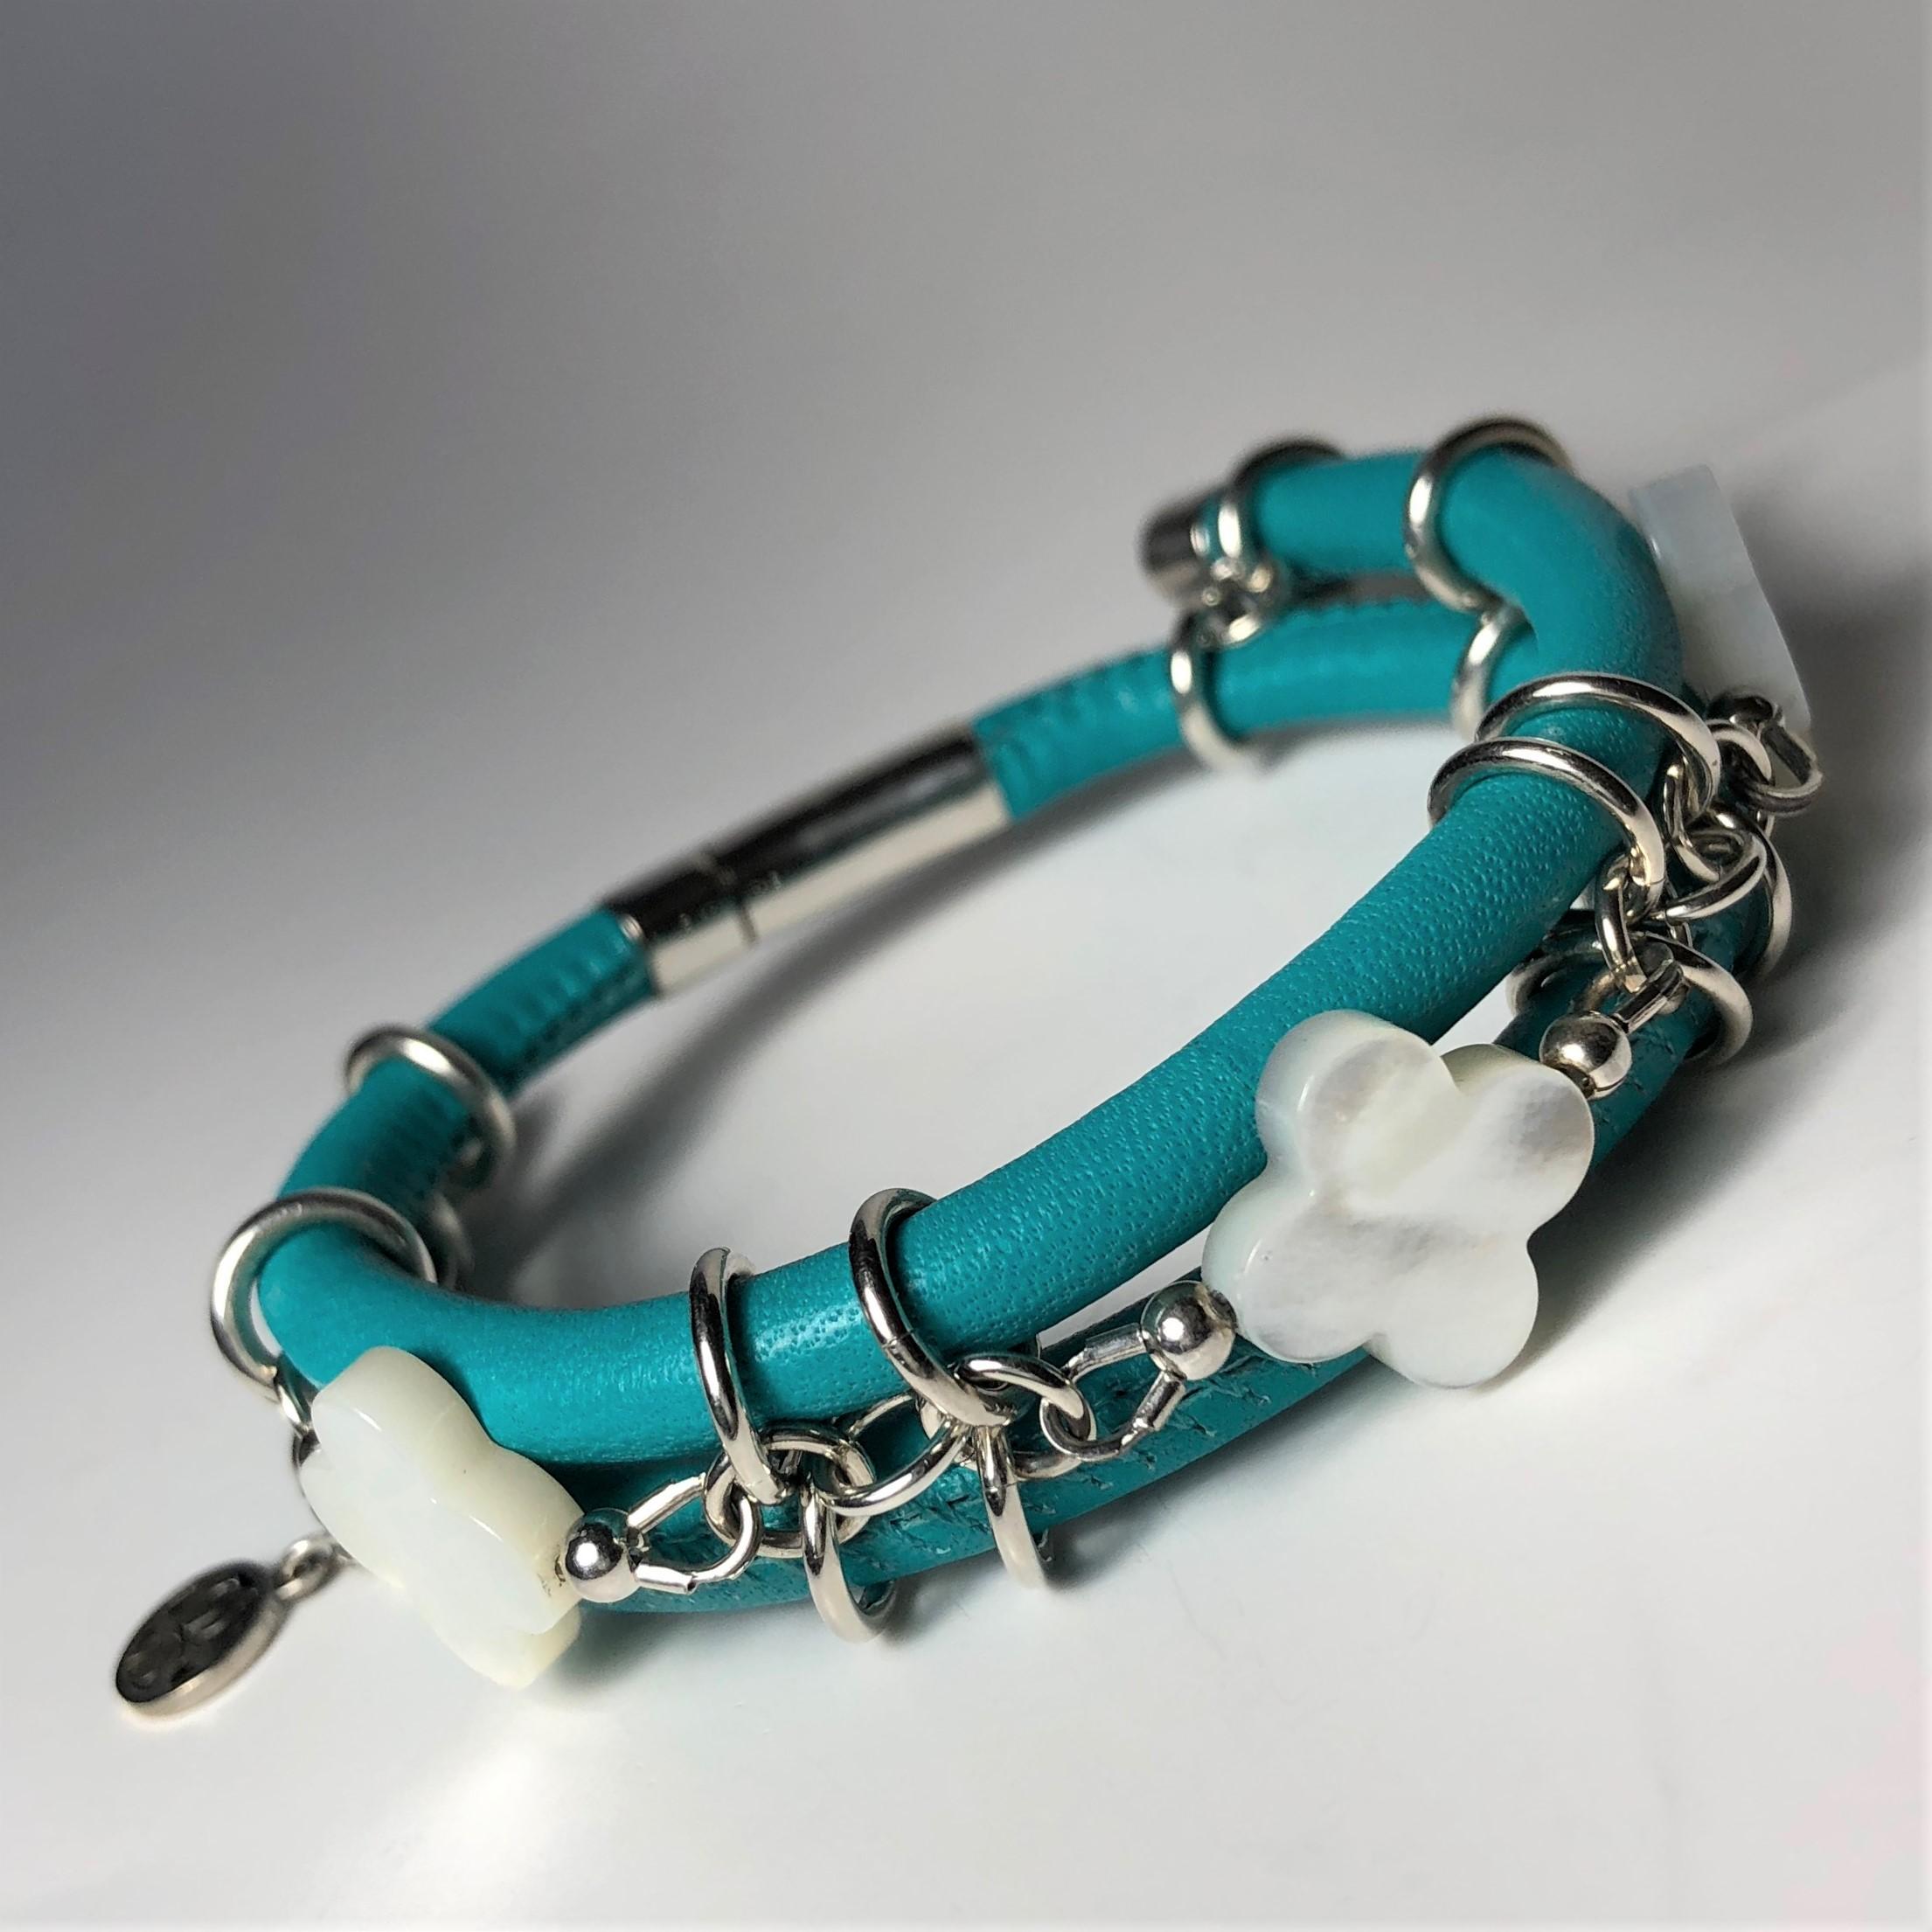 The turquoise stitched leather double bangle bracelet made with three mother of pearls clovers cut gemstones and connecting by silver links and a barrel lock. 

Length: 7.0 in ( 18.0 cm )

Mother of pearls clover cut 0.54 x 0.54 in ( 14.0 x 14.0 mm